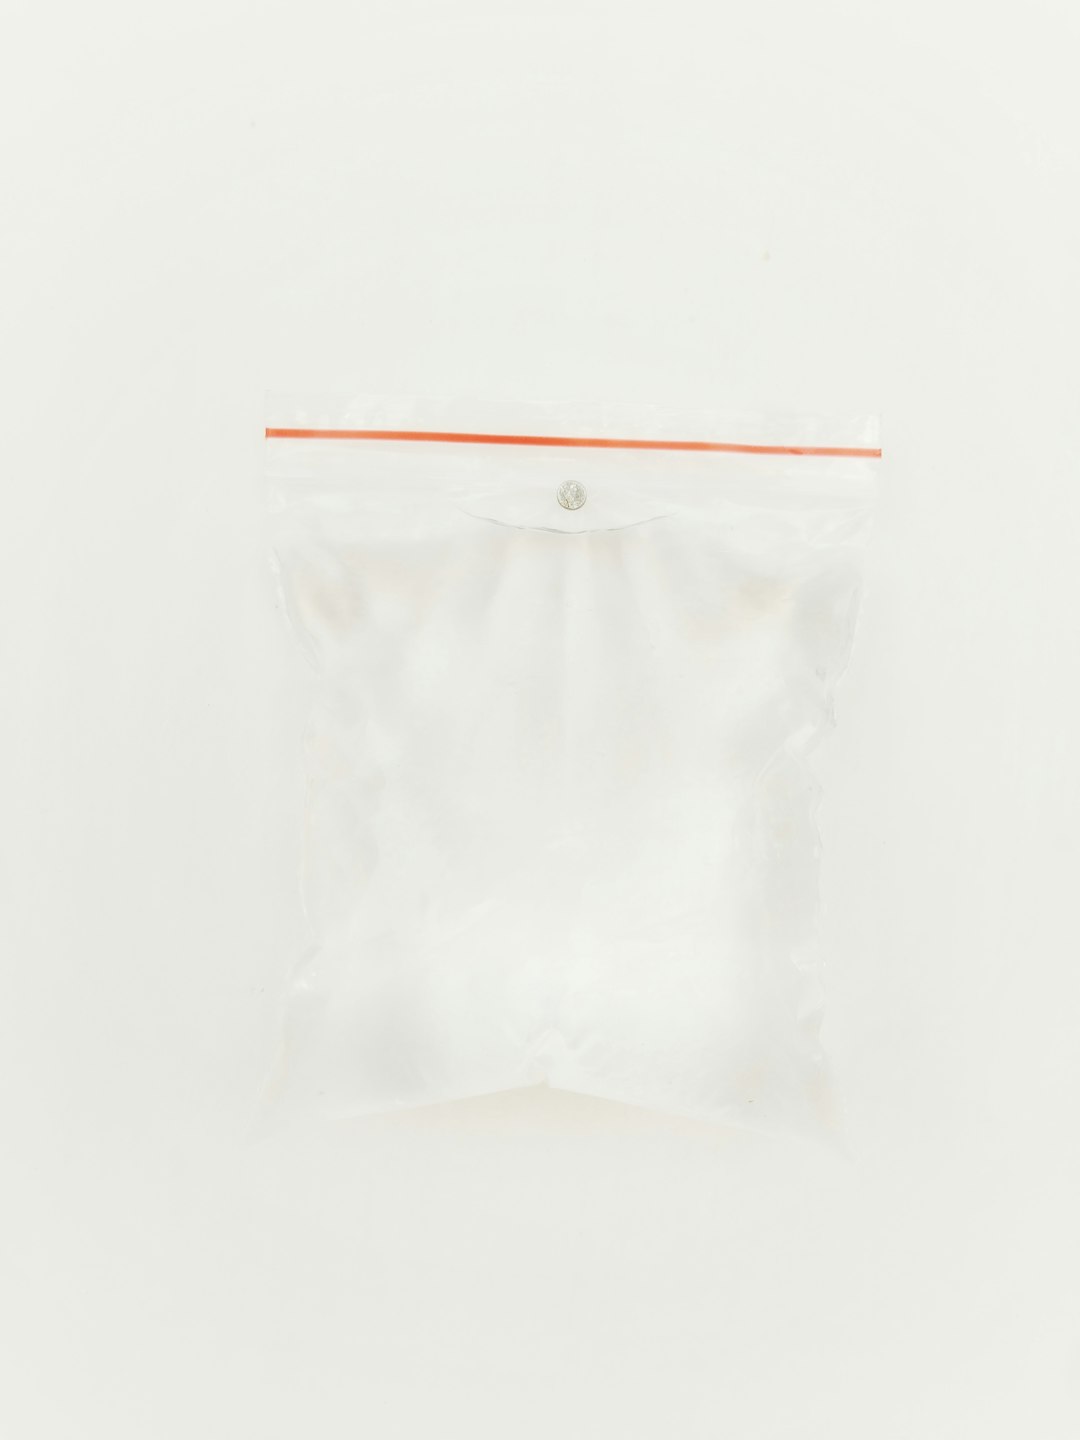 white plastic pack on white surface